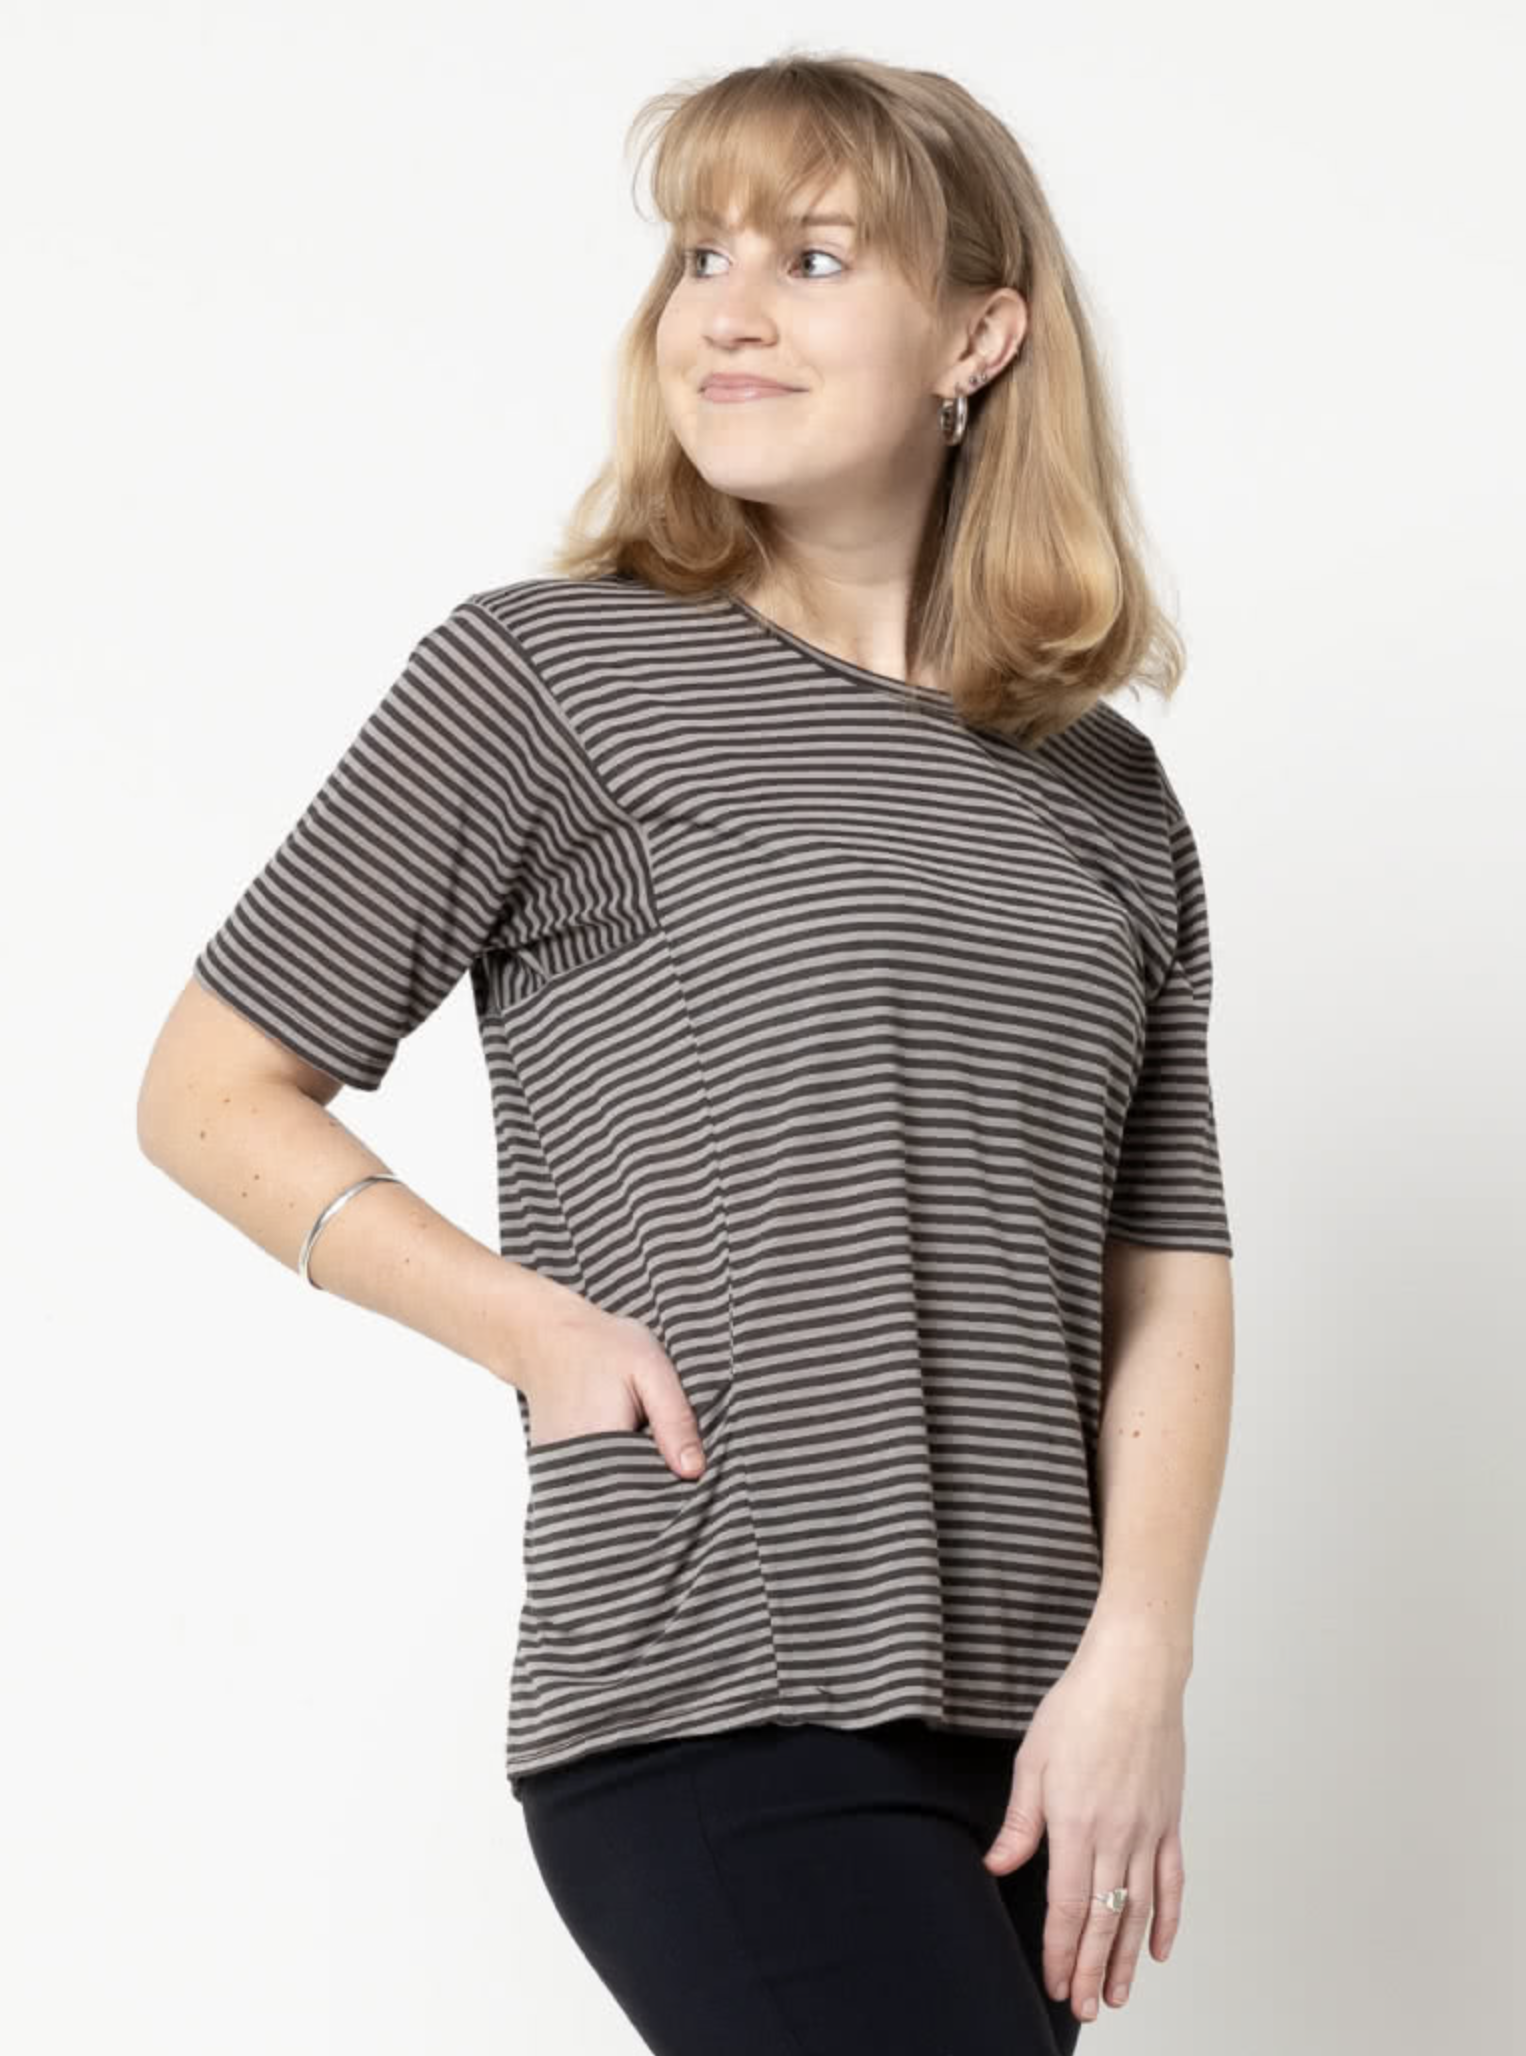 Woman wearing the Ada Knit Top sewing pattern from Style Arc on The Fold Line. A top pattern made in jersey, baby wool or knit fabrics, featuring a boxy silhouette, round neck, short sleeves, square-shaped armholes, and slightly draped pockets inserted in